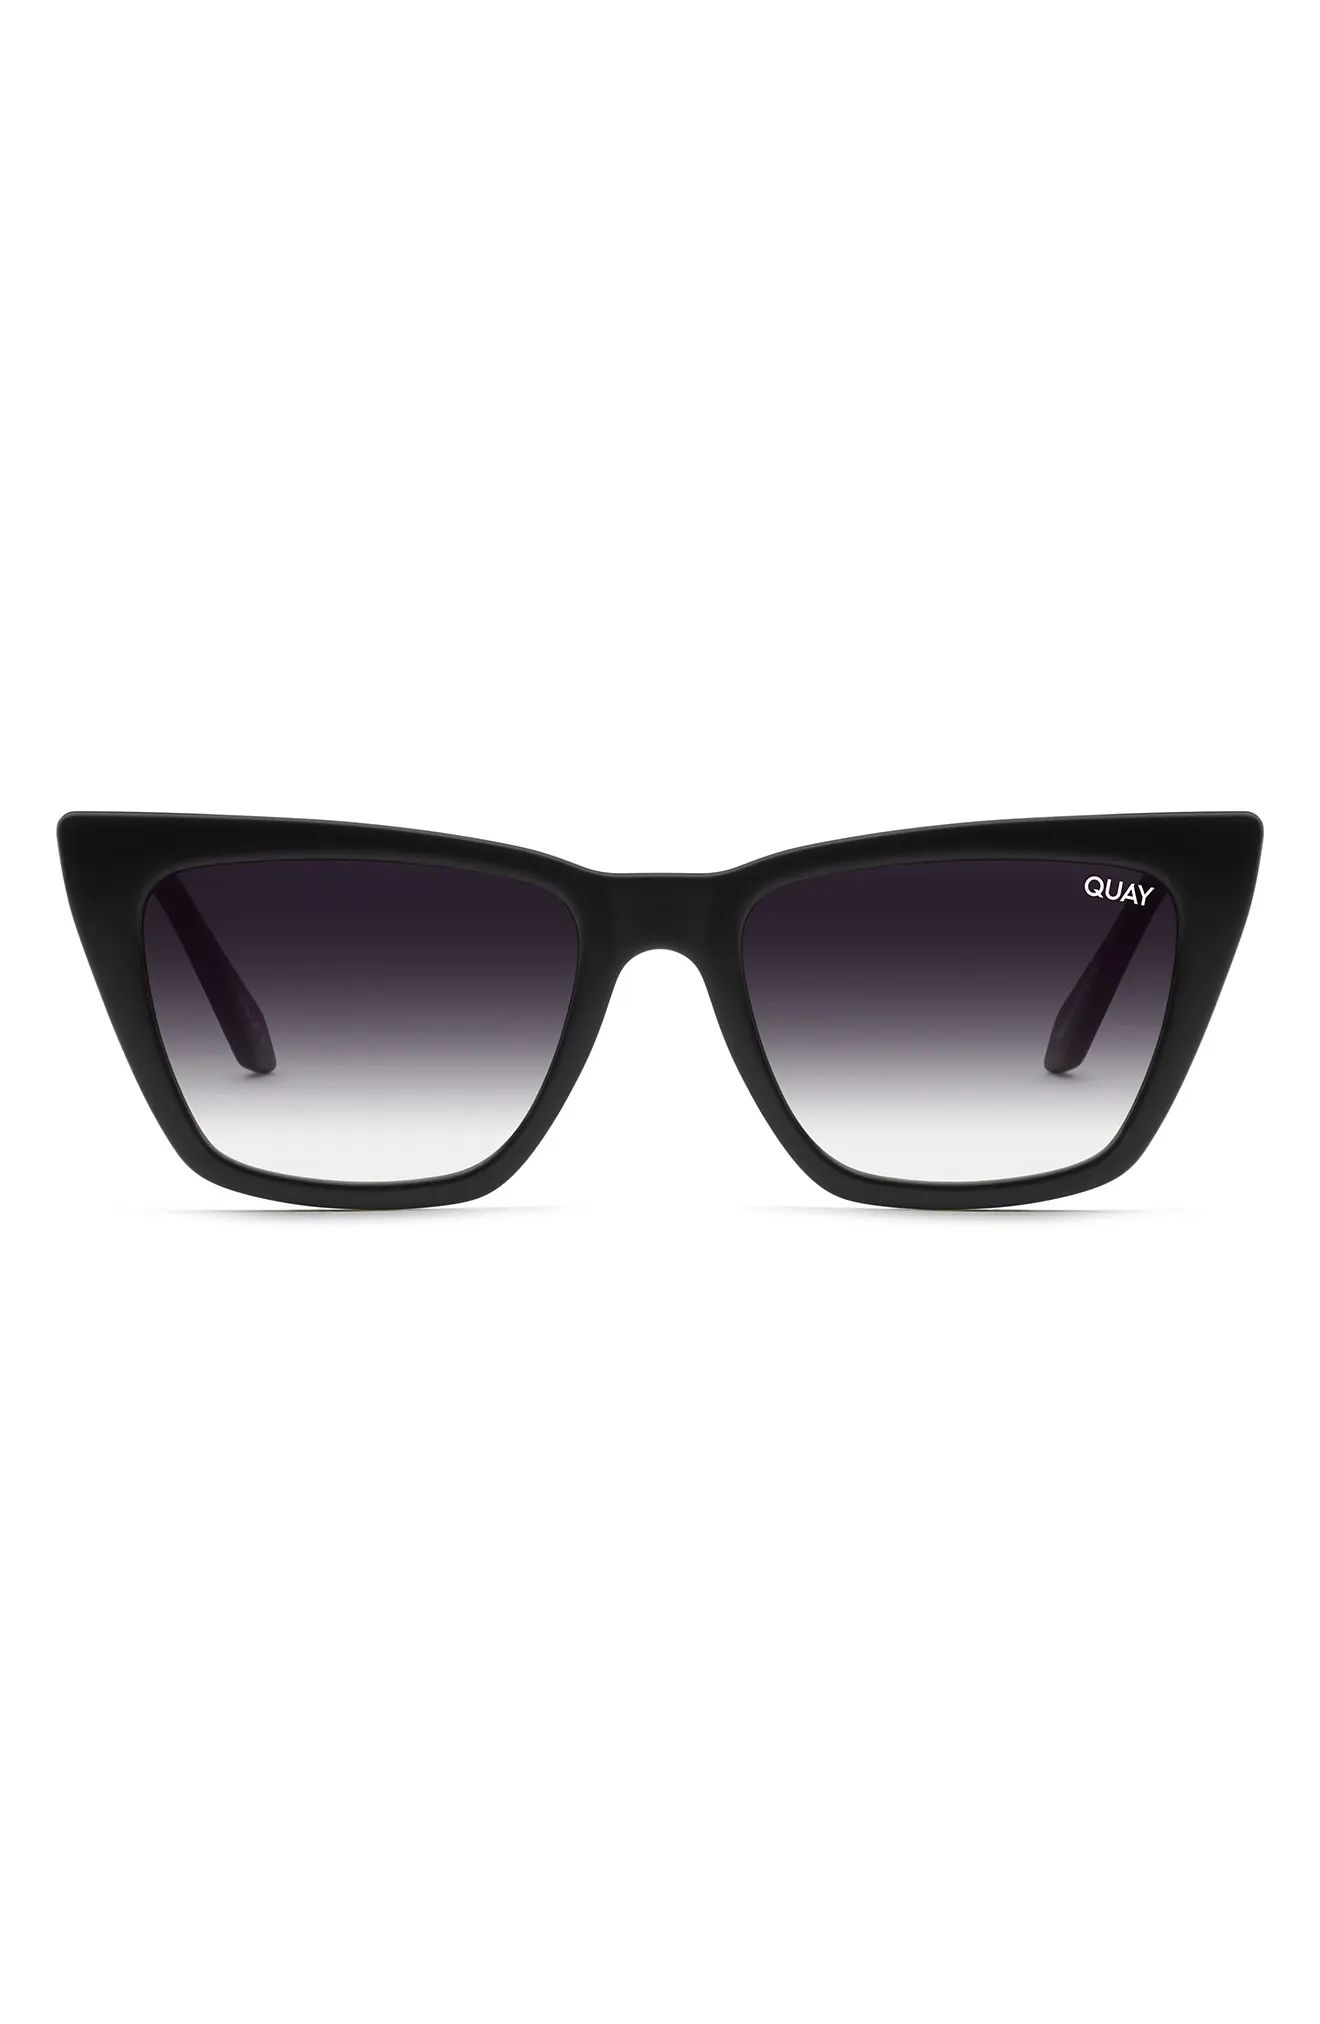 Quay Australia Call The Shots 48mm Gradient Cat Eye Sunglasses in Black /Fade at Nordstrom | Nordstrom